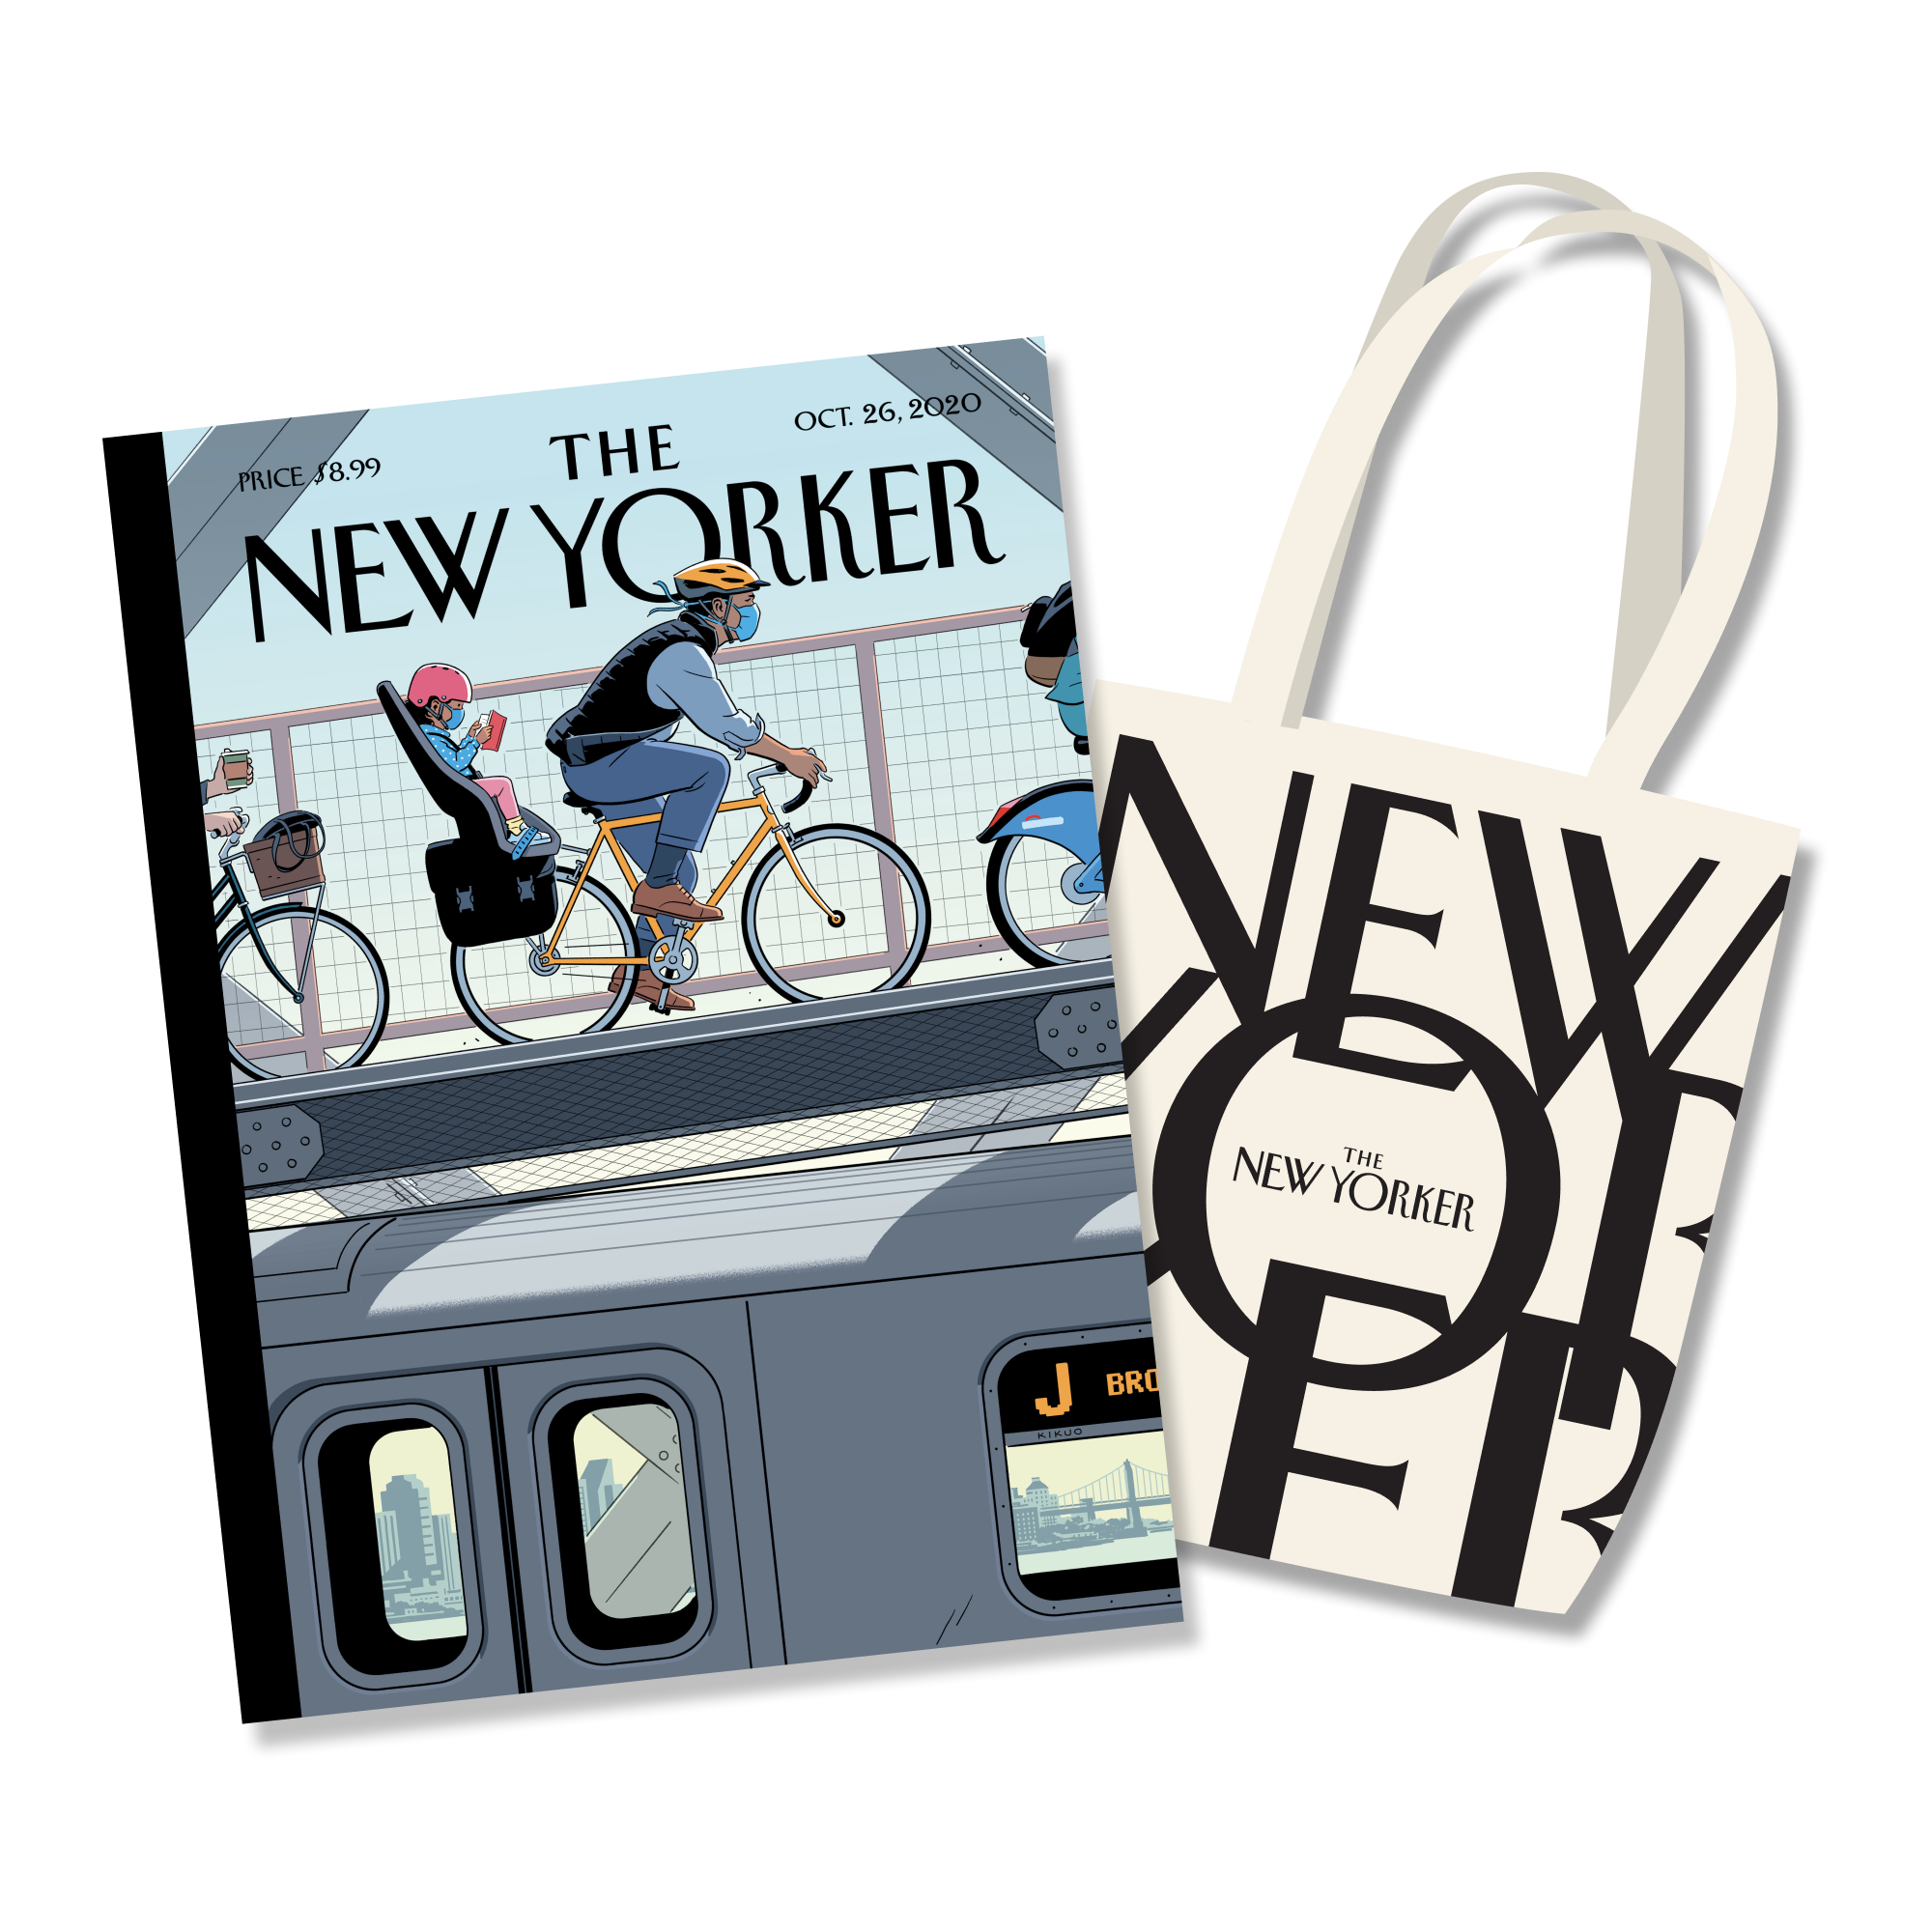 subscription-to-the-new-yorker-the-new-yorker-merch